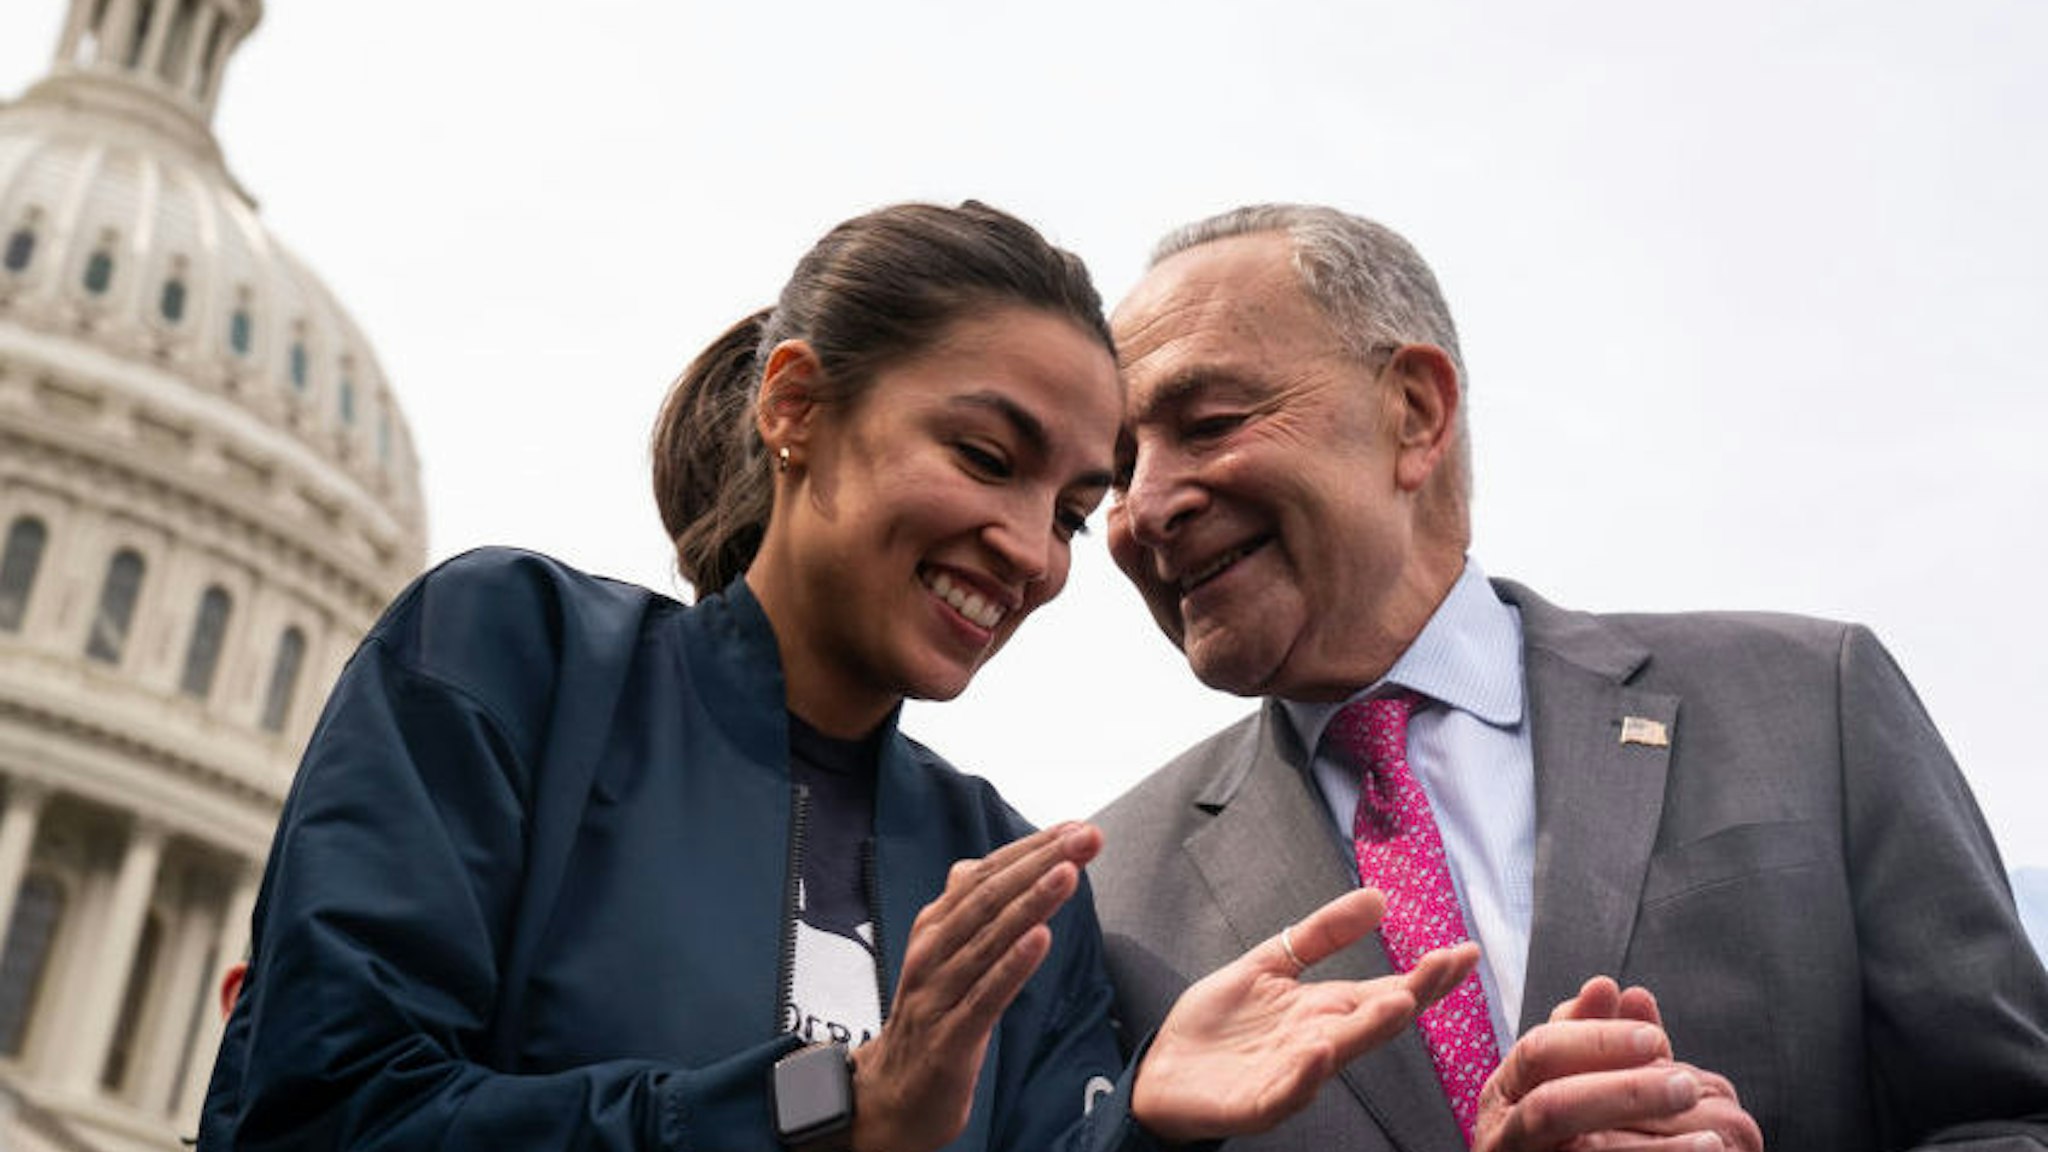 WASHINGTON, DC - AUGUST 03: Rep. Alexandria Ocasio-Cortez (D-NY) and Senate Majority Leader Chuck Schumer (D-NY) outside the House of Representatives while speaking to members of the press on Capitol Hill on Tuesday, Aug. 3, 2021 in Washington, DC. (